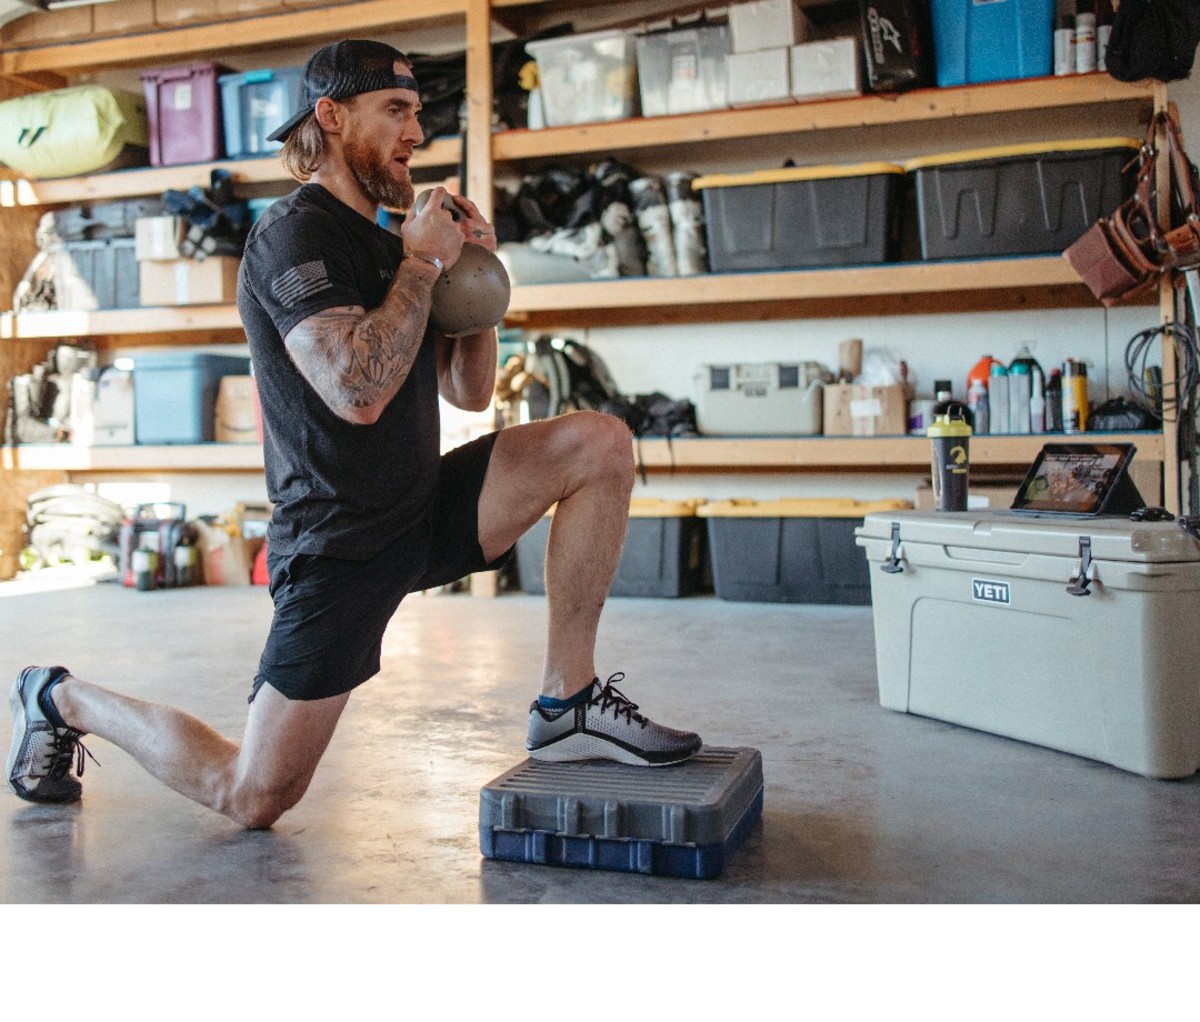 Guy doing kettle bell excercise in garage, with tablet propped up on a cooler